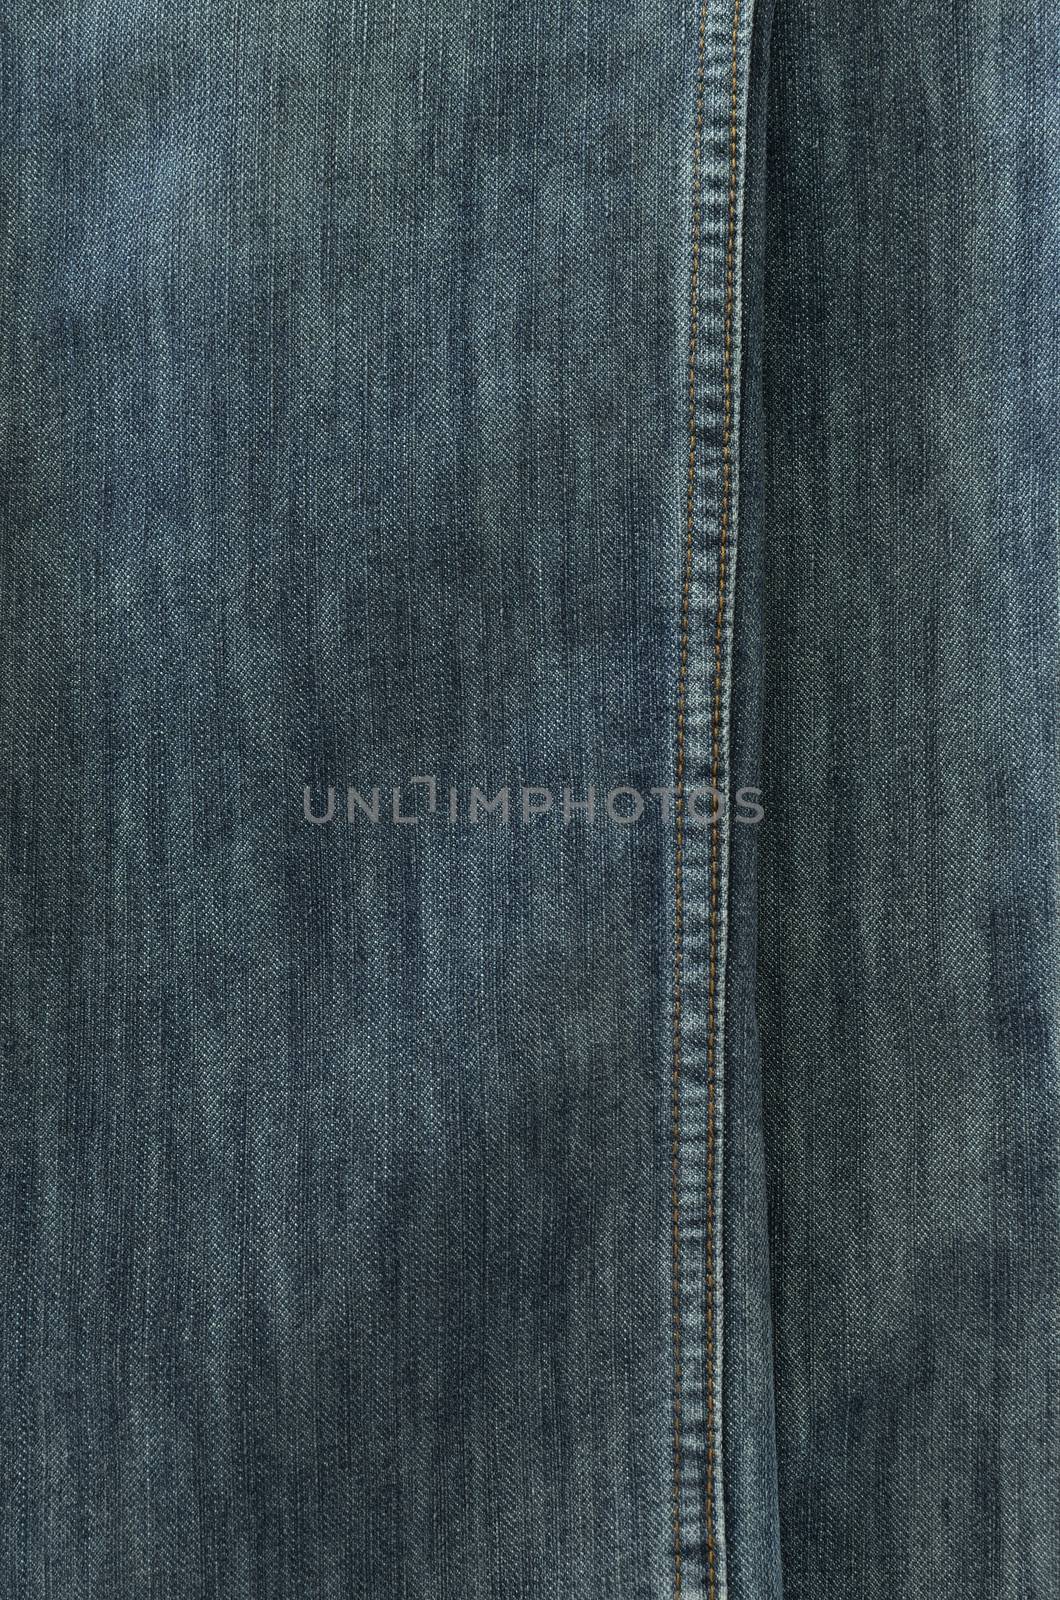 Jeans texture with seams for background by Kheat